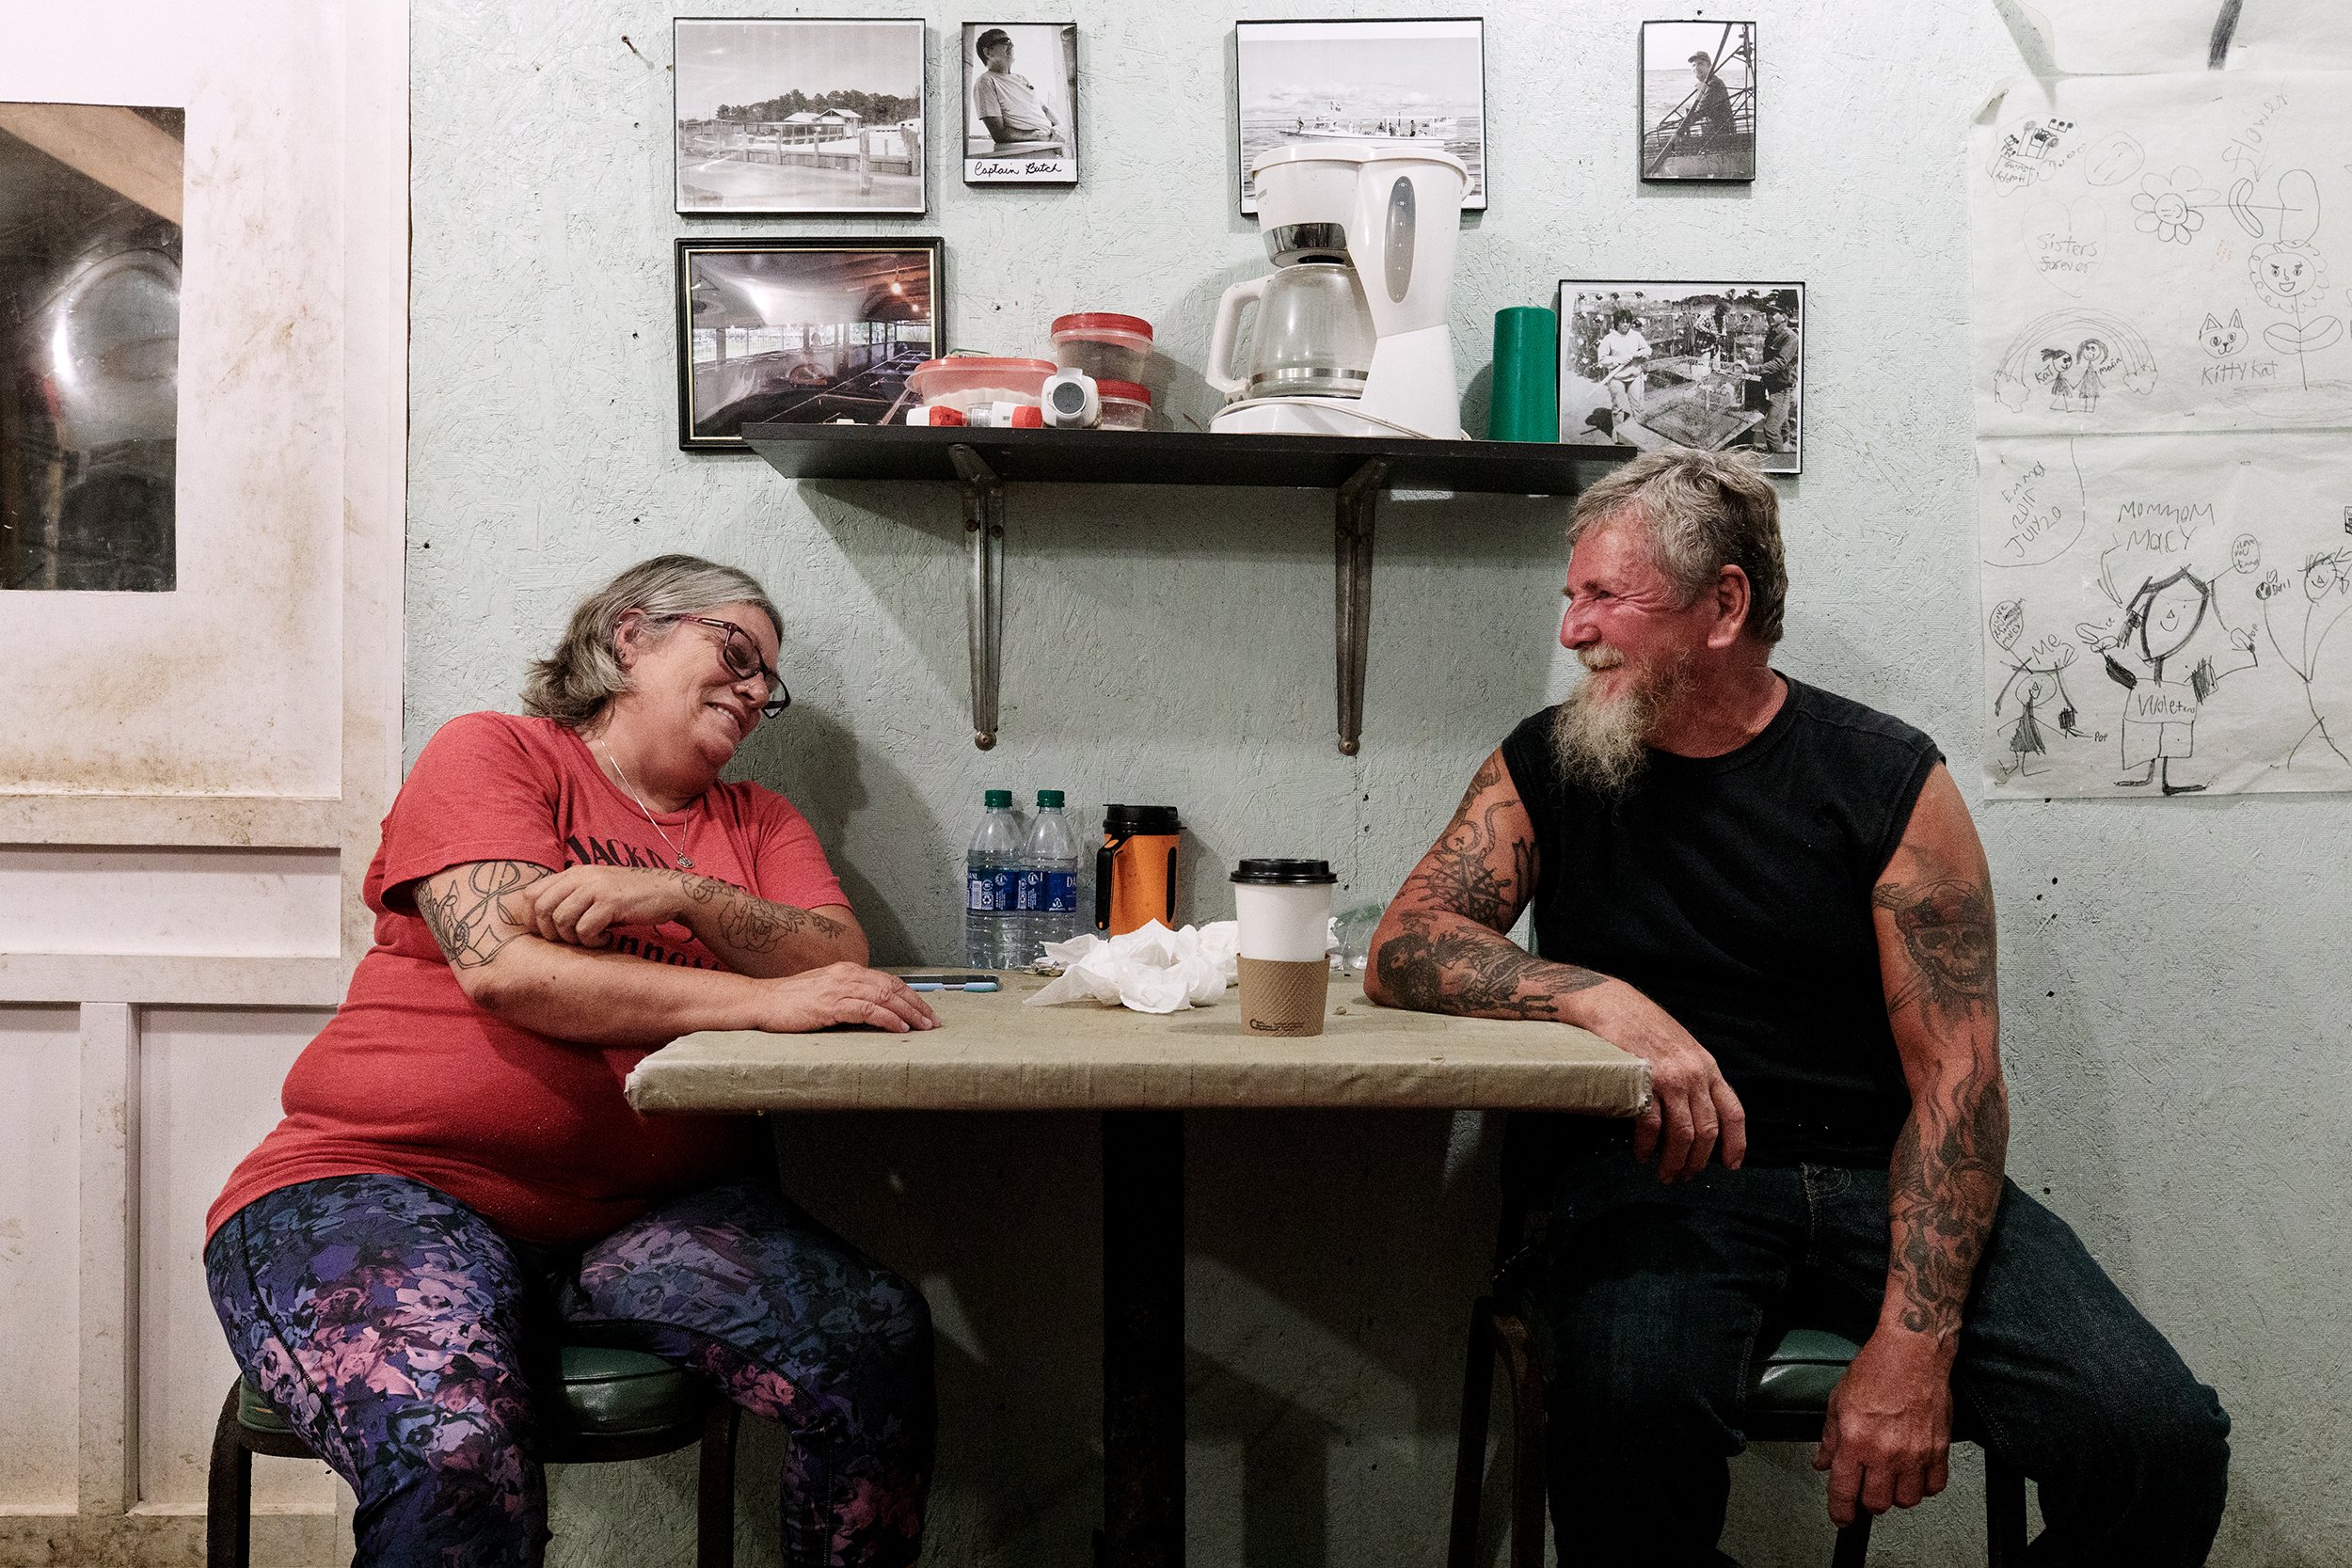  Clyde “Butch” Walters and his wife MaeBelle sit for a portrait in their crab shanty. Family photos and their children’s drawings hang above them. The couple have sold blue crabs together for 38 years, but between their three children, “none of them 